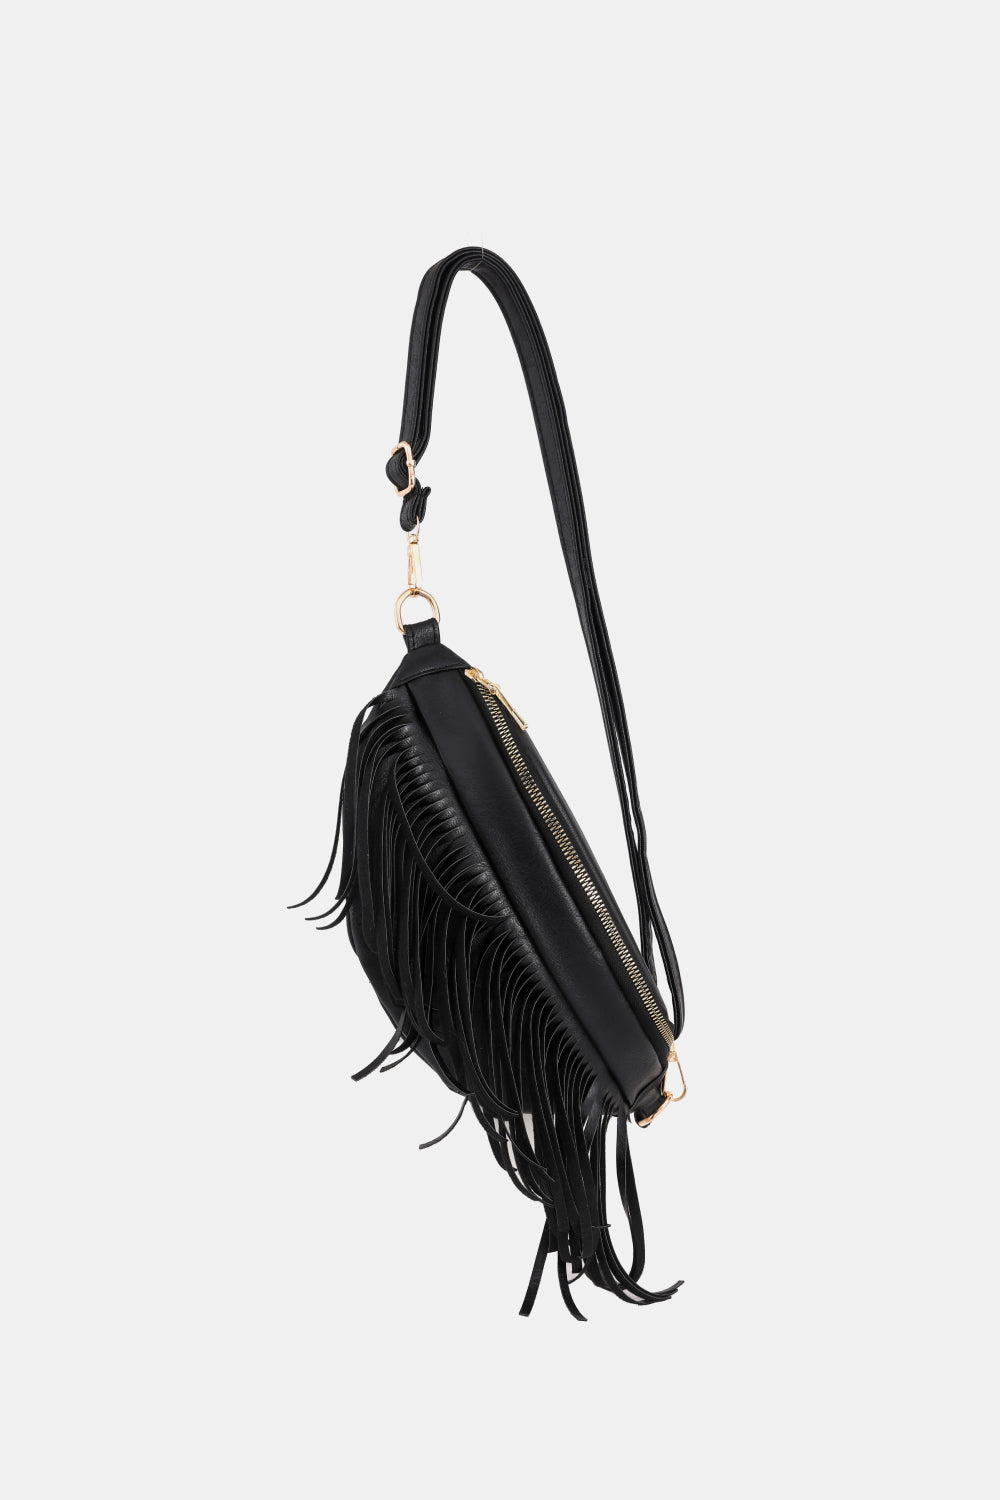 Fringed PU Leather Sling Bag  Southern Soul Collectives 